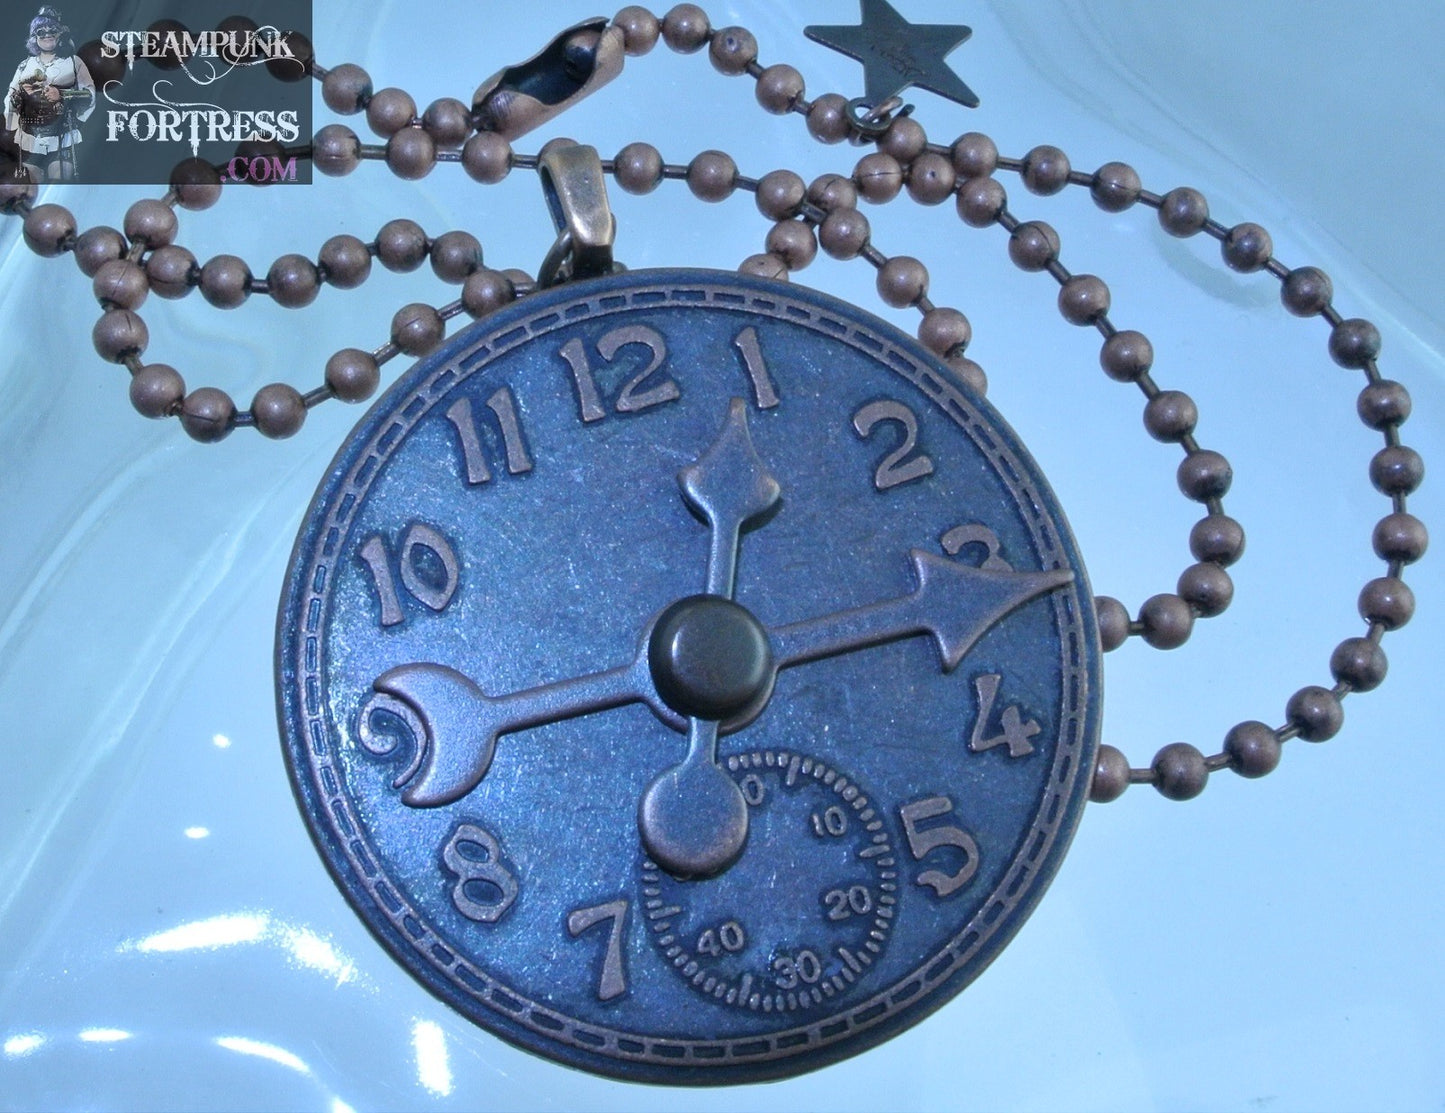 COPPER CLOCK WATCH FACE DIAL 2 MOVEABLE HANDS PIN BROOCH NECKLACE STARR WILDE STEAMPUNK FORTRESS